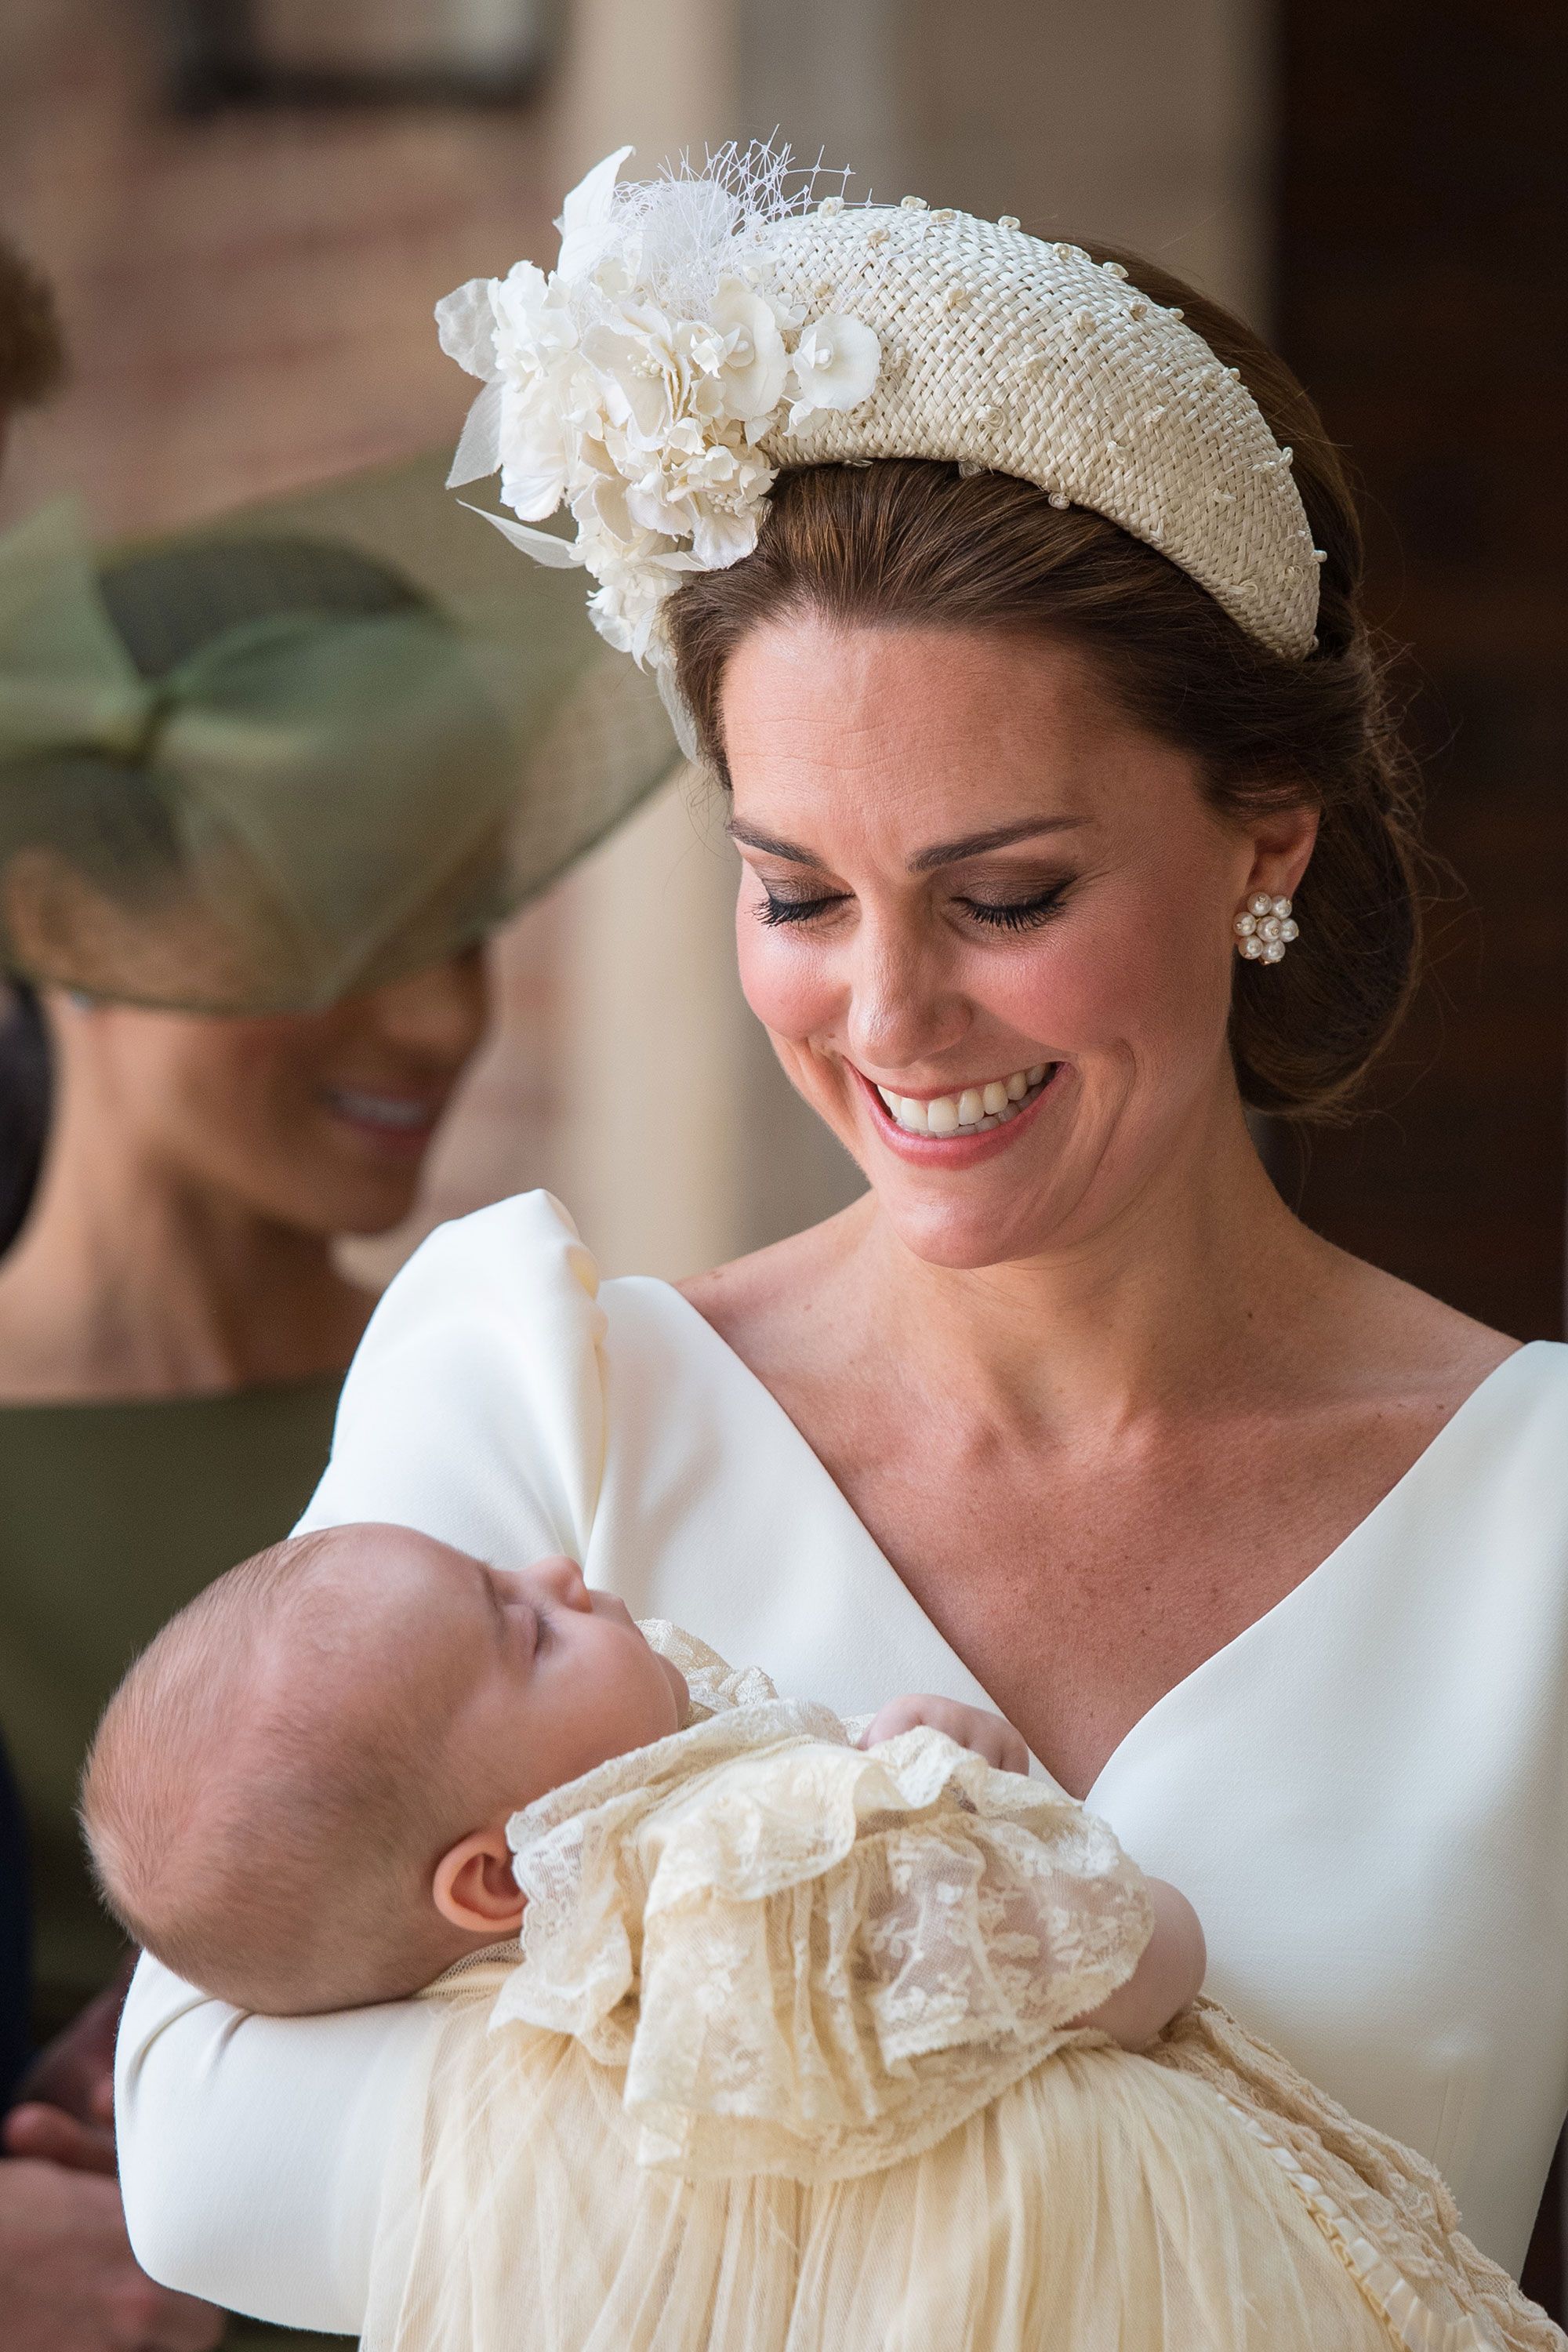 Pippa Middleton Wears Collared Pale Blue Dress to Prince Louis's Christening